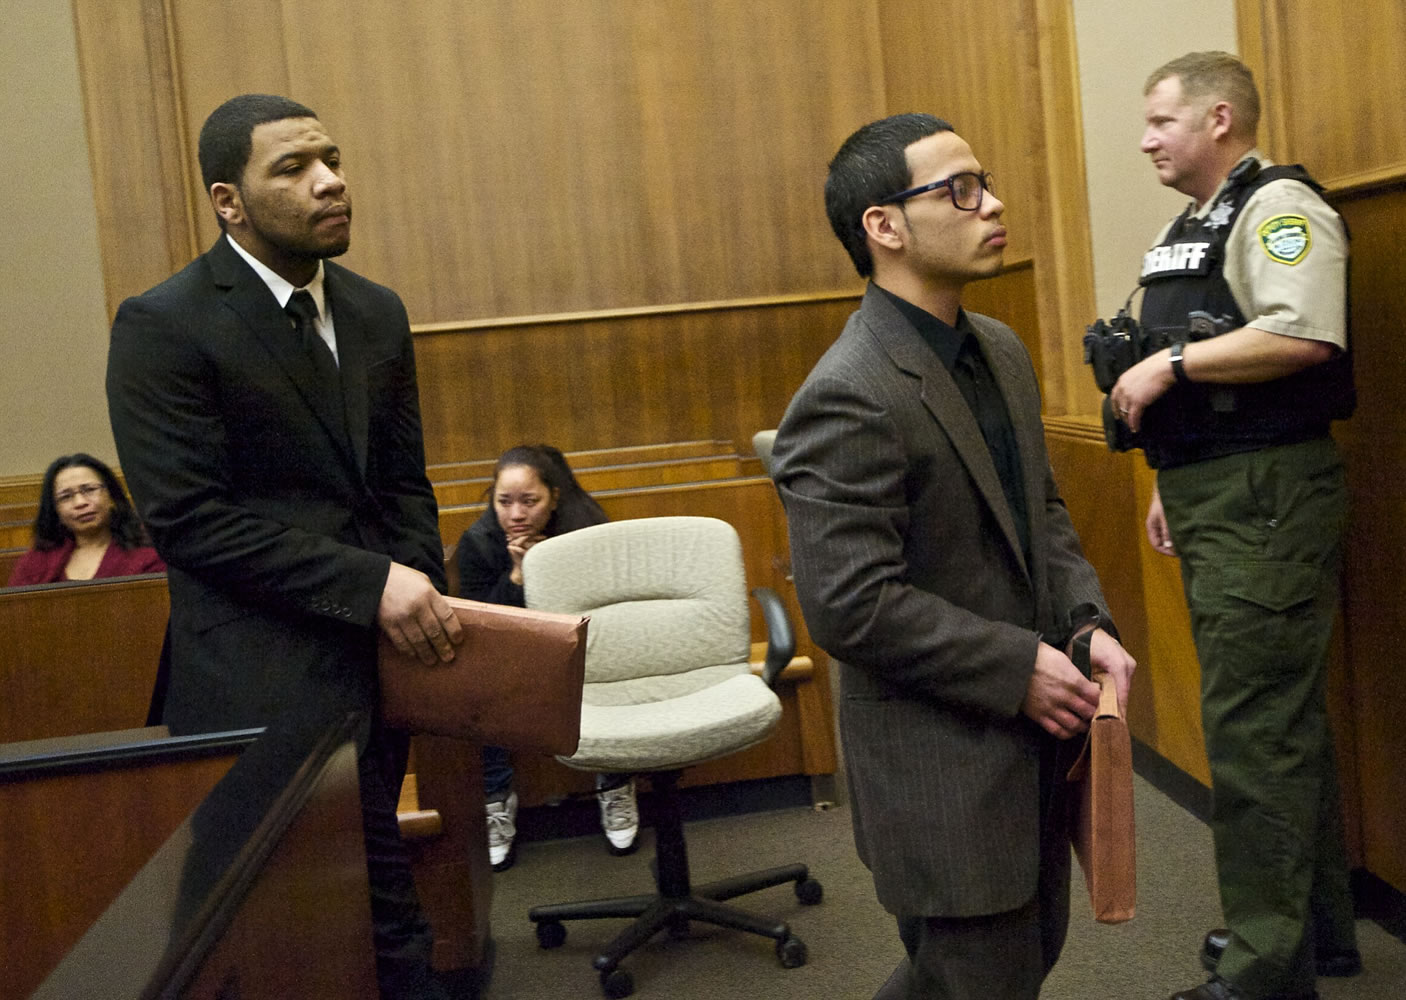 Co-defendants Brandon English, left, and Calvin Quichocho are escorted out of Clark County Superior Court Judge Barbara Johnson's courtroom Thursday after a jury found them guilty of multiple crimes connected with a home-invasion robbery in Vancouver in December.